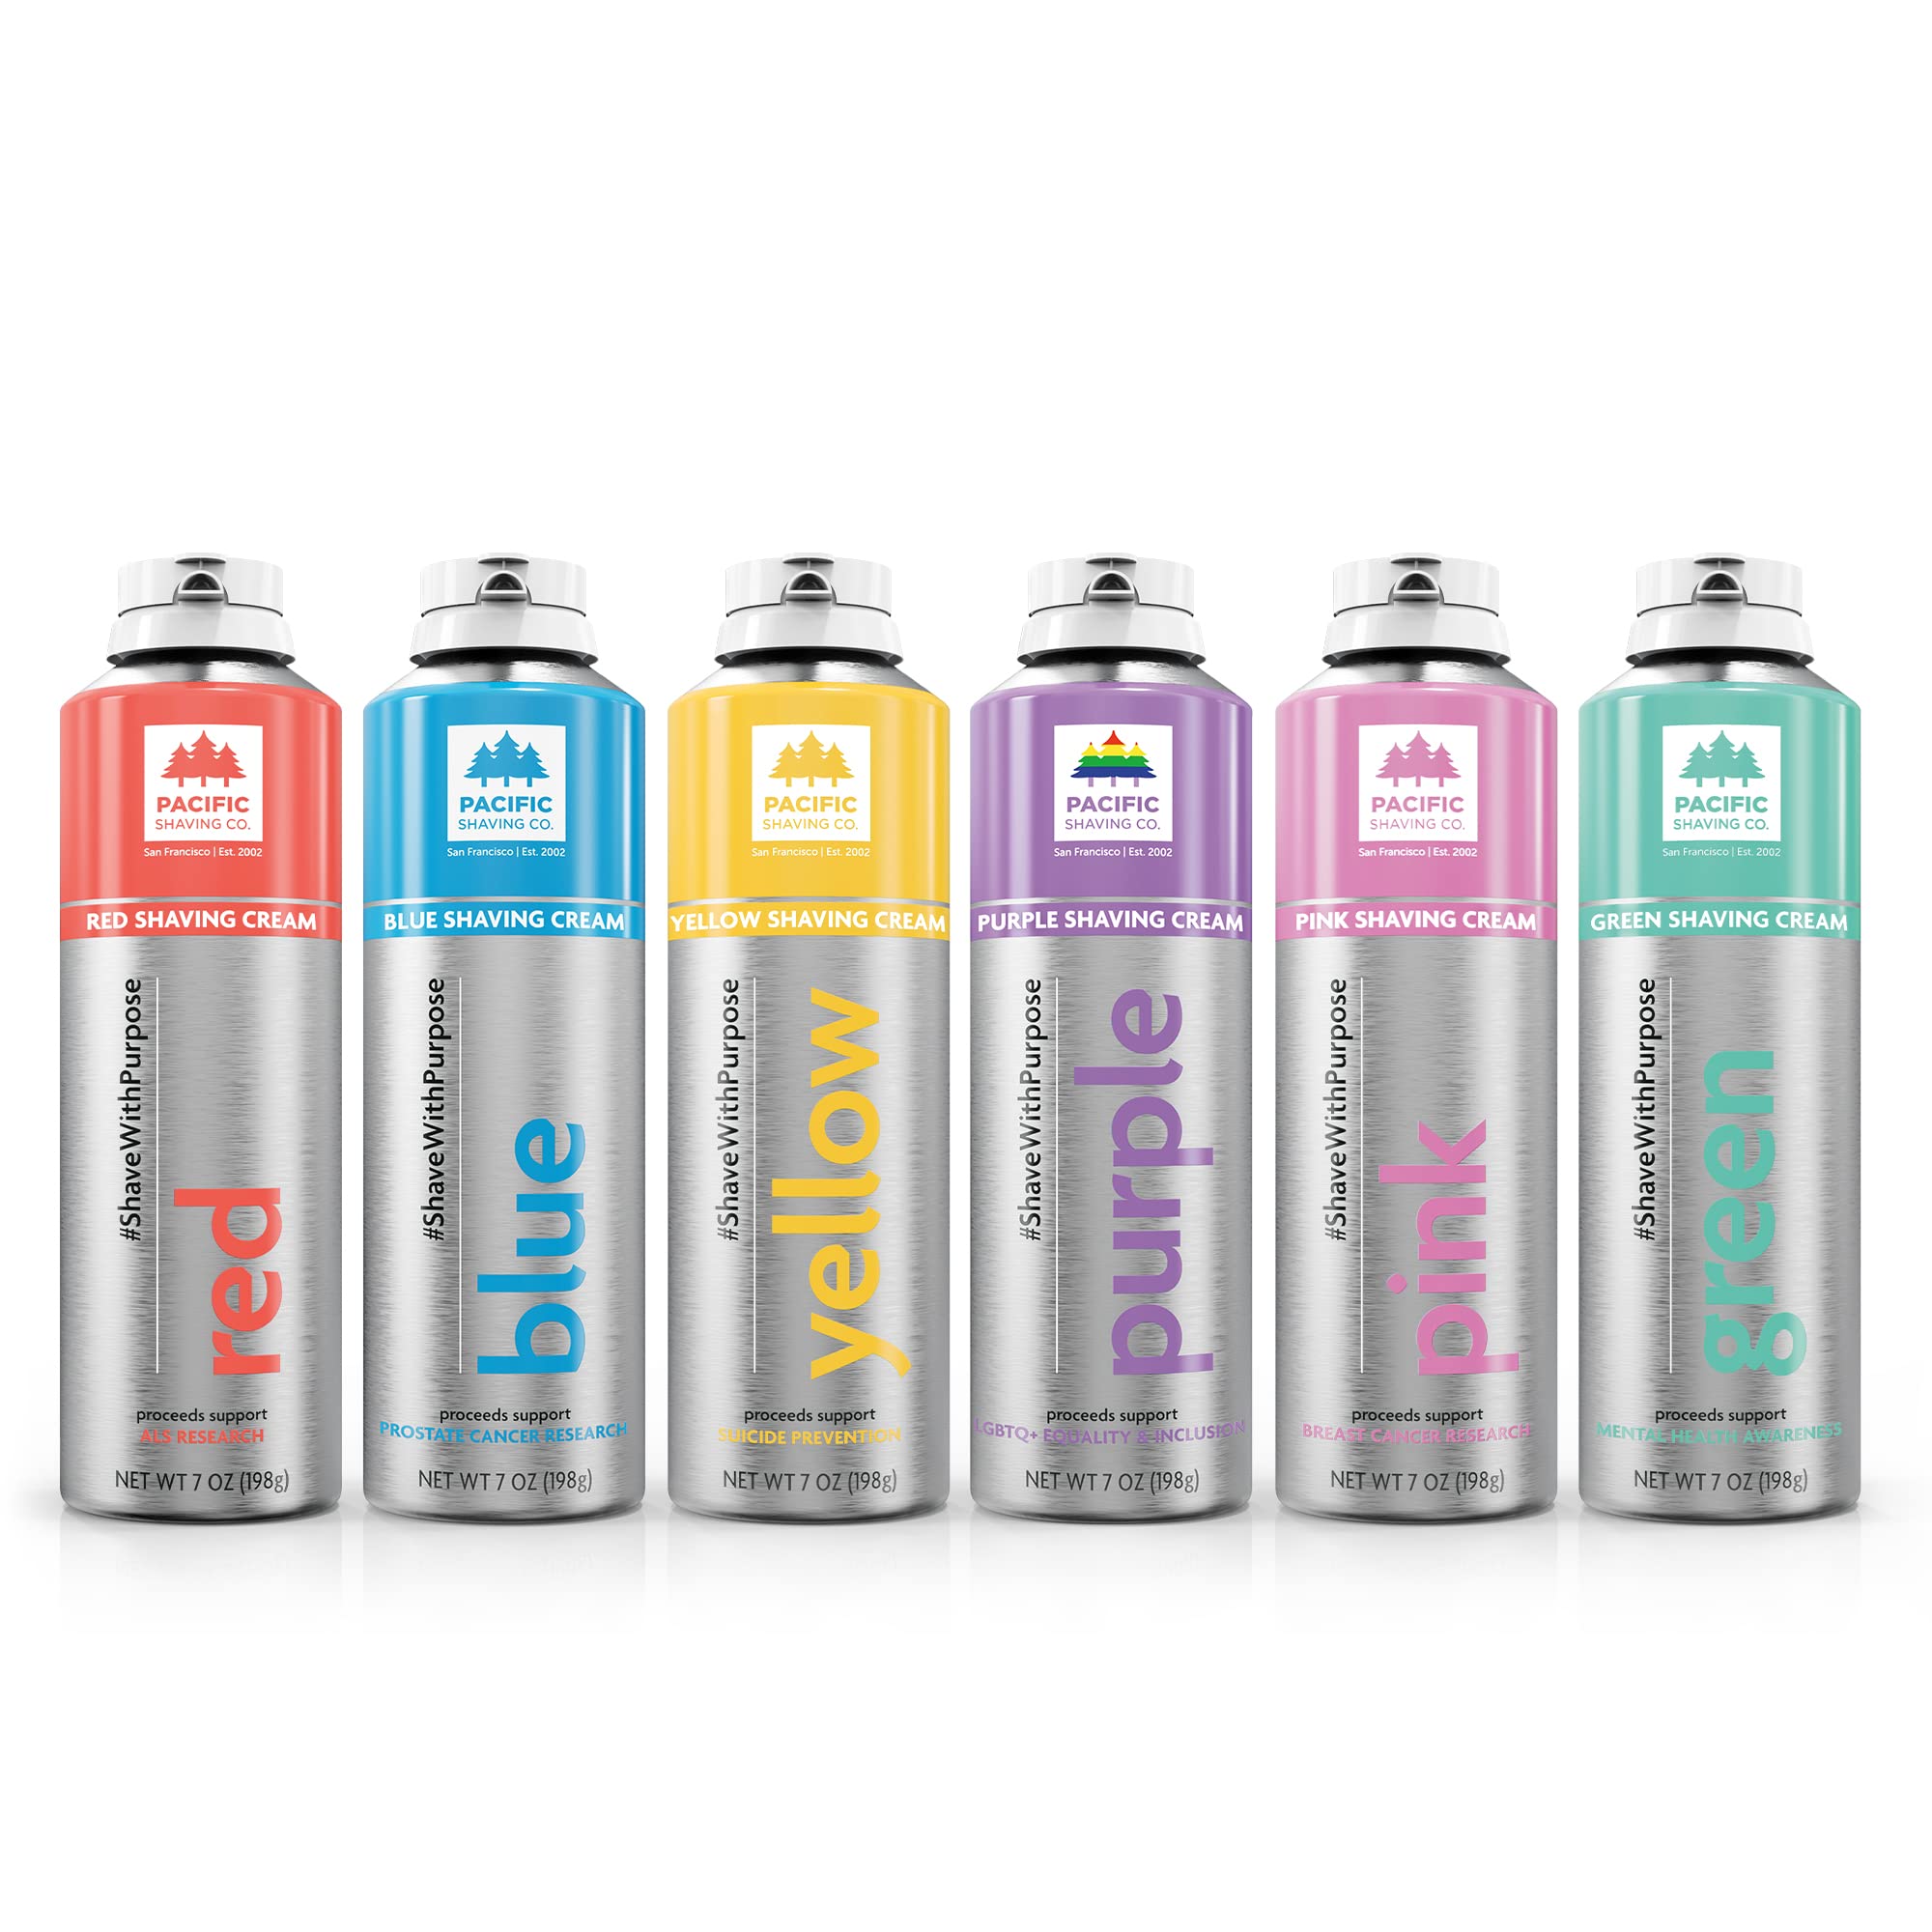 Pacific Shaving company cOLORFUL Shaving cream, Shave with Purpose - Safe & Natural Ingredients, cruelty Free, Made in t